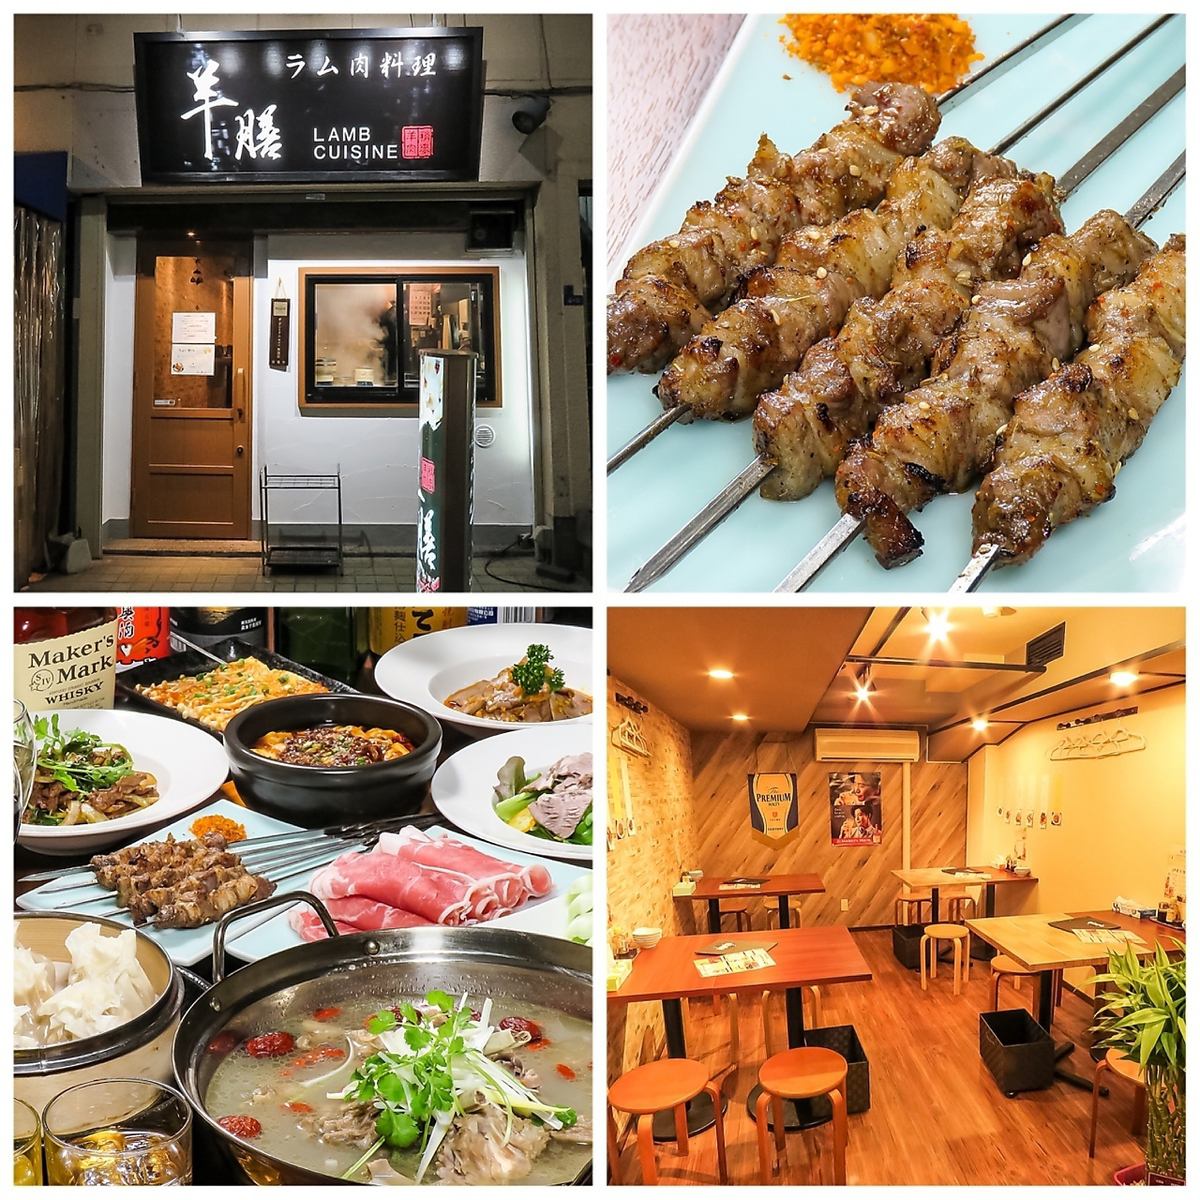 ◆ January 2020 NEW OPEN ◆ A 2-minute walk from Kameido Station! Adult lamb specialty store ◇ Also for small groups